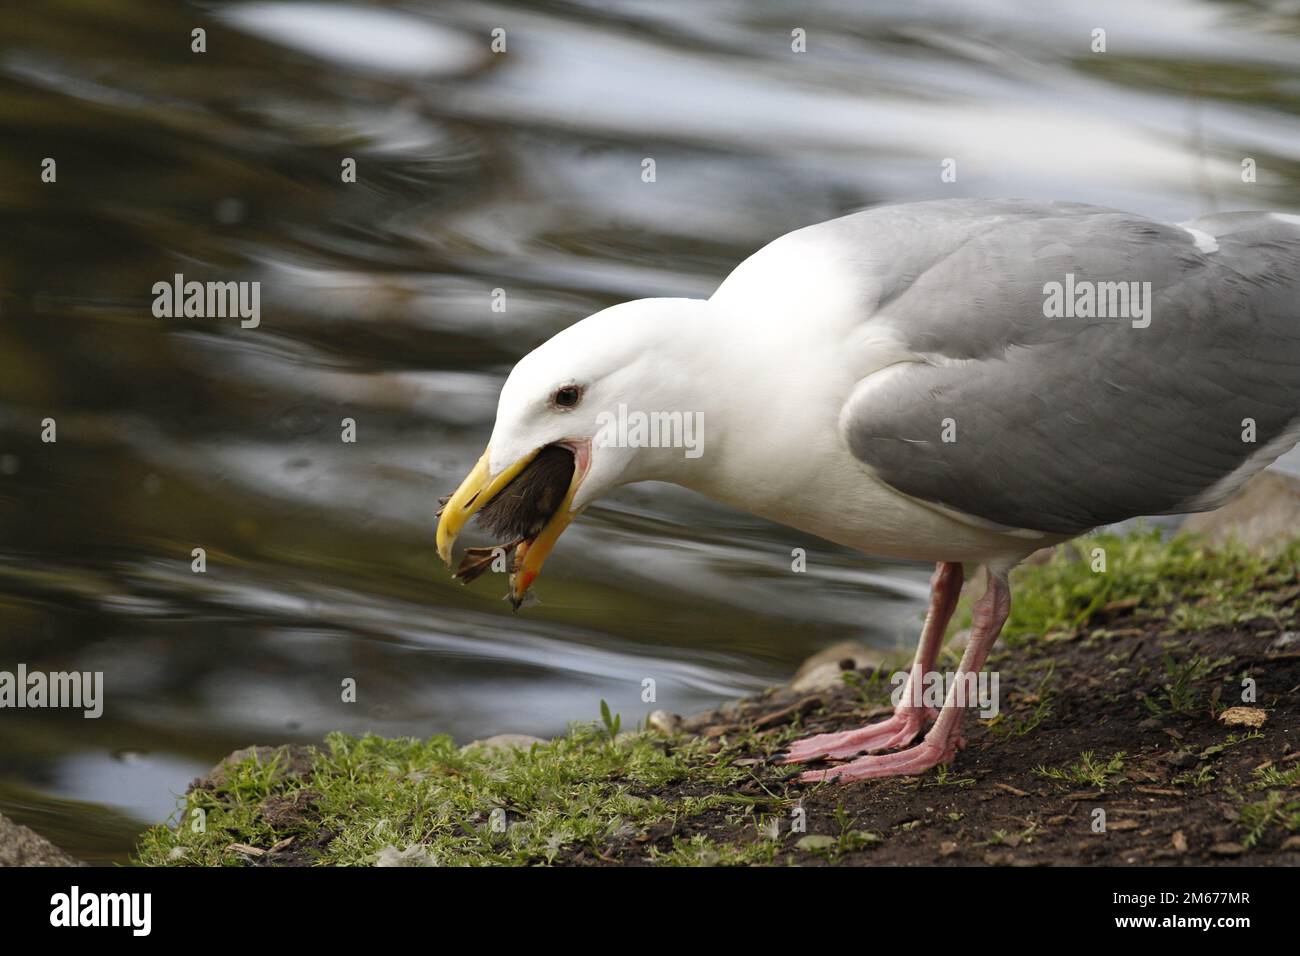 A Glaucous-winged Gull (Larus glaucescens) catching and eating a mallard duckling on land beside water. Taken in Victoria, BC, Canada. Stock Photo